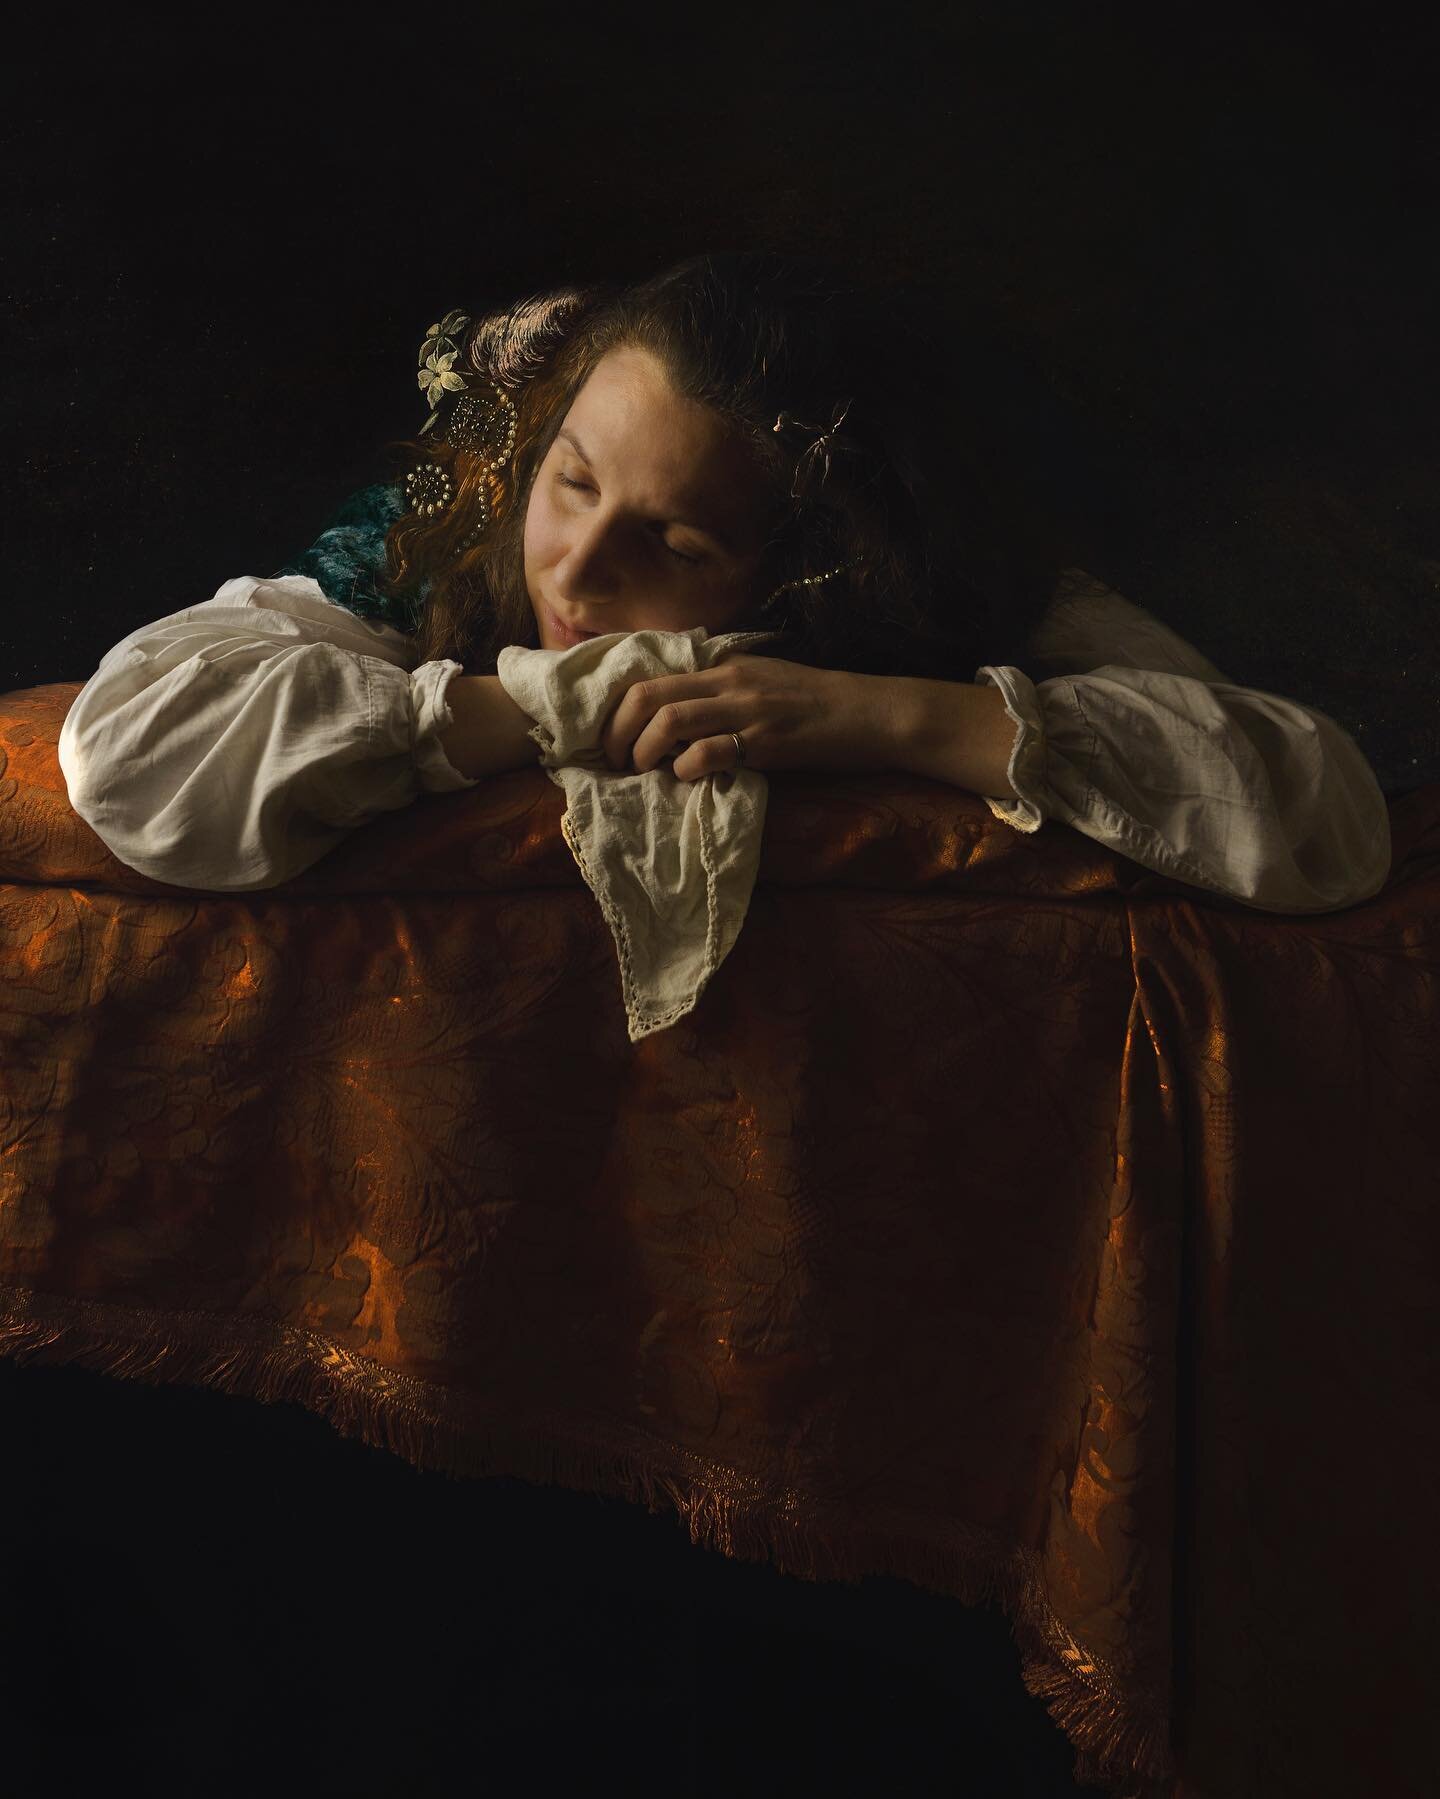 I re-enacted the sleeping girl of a beautiful oil painting by an unknown 17th-century artist (previously attributed to Theodoor Van Loon or Domenico Fetti). I did it by staying slumped for an entire afternoon over an ironing board covered with brocad